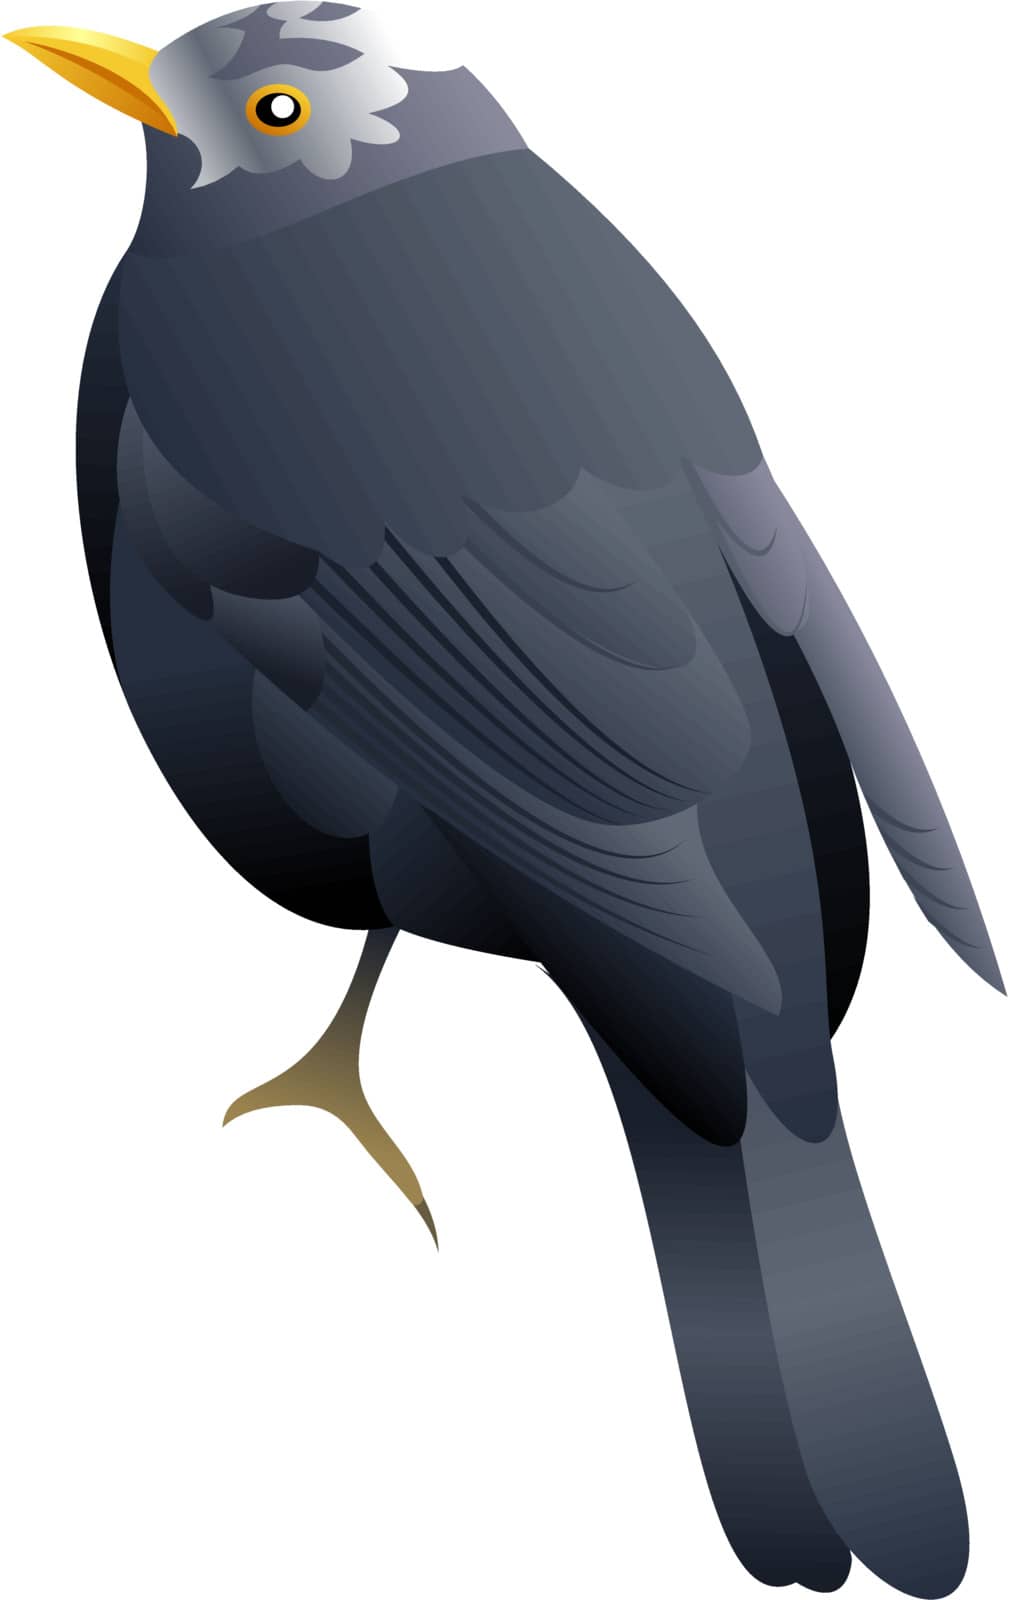 illustration of a black bird with white head